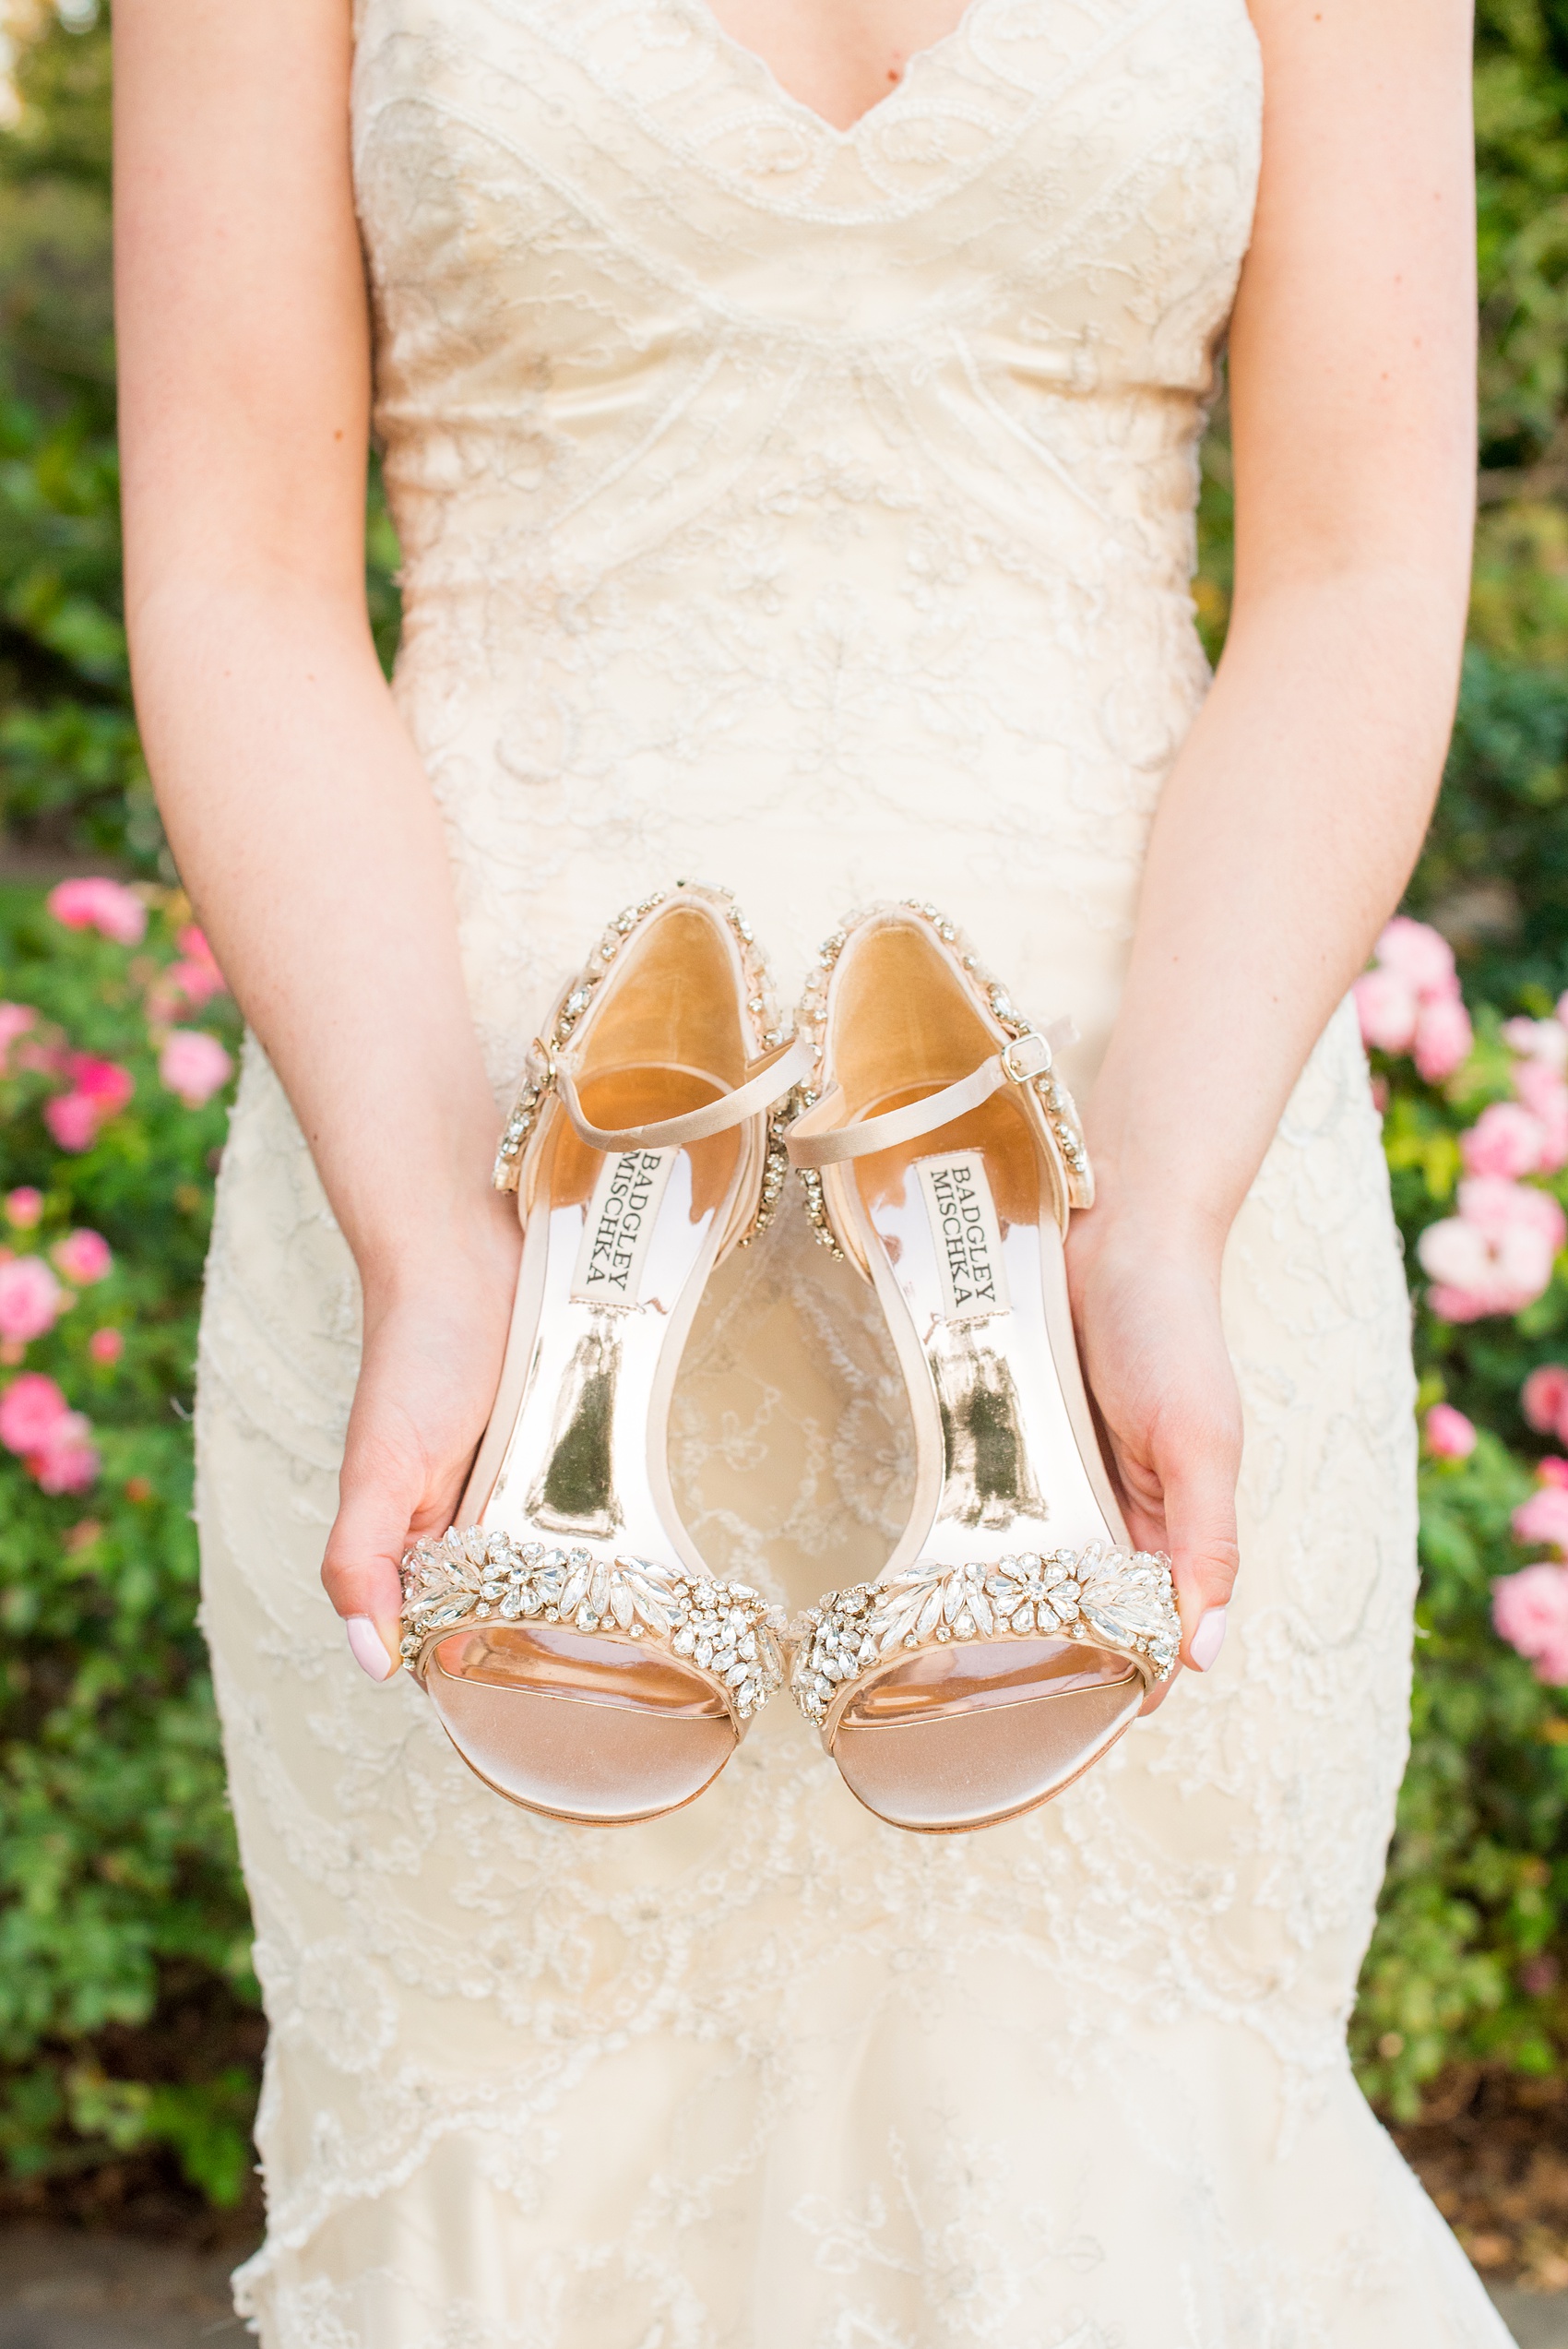 Mikkel Paige Photography photos from a bridal session at Raleigh's JC Raulston Arboretum on North Carolina's NC State campus. Picture of the bride holding her gold and rhinestone high heel Badgley Mischka wedding shoes.